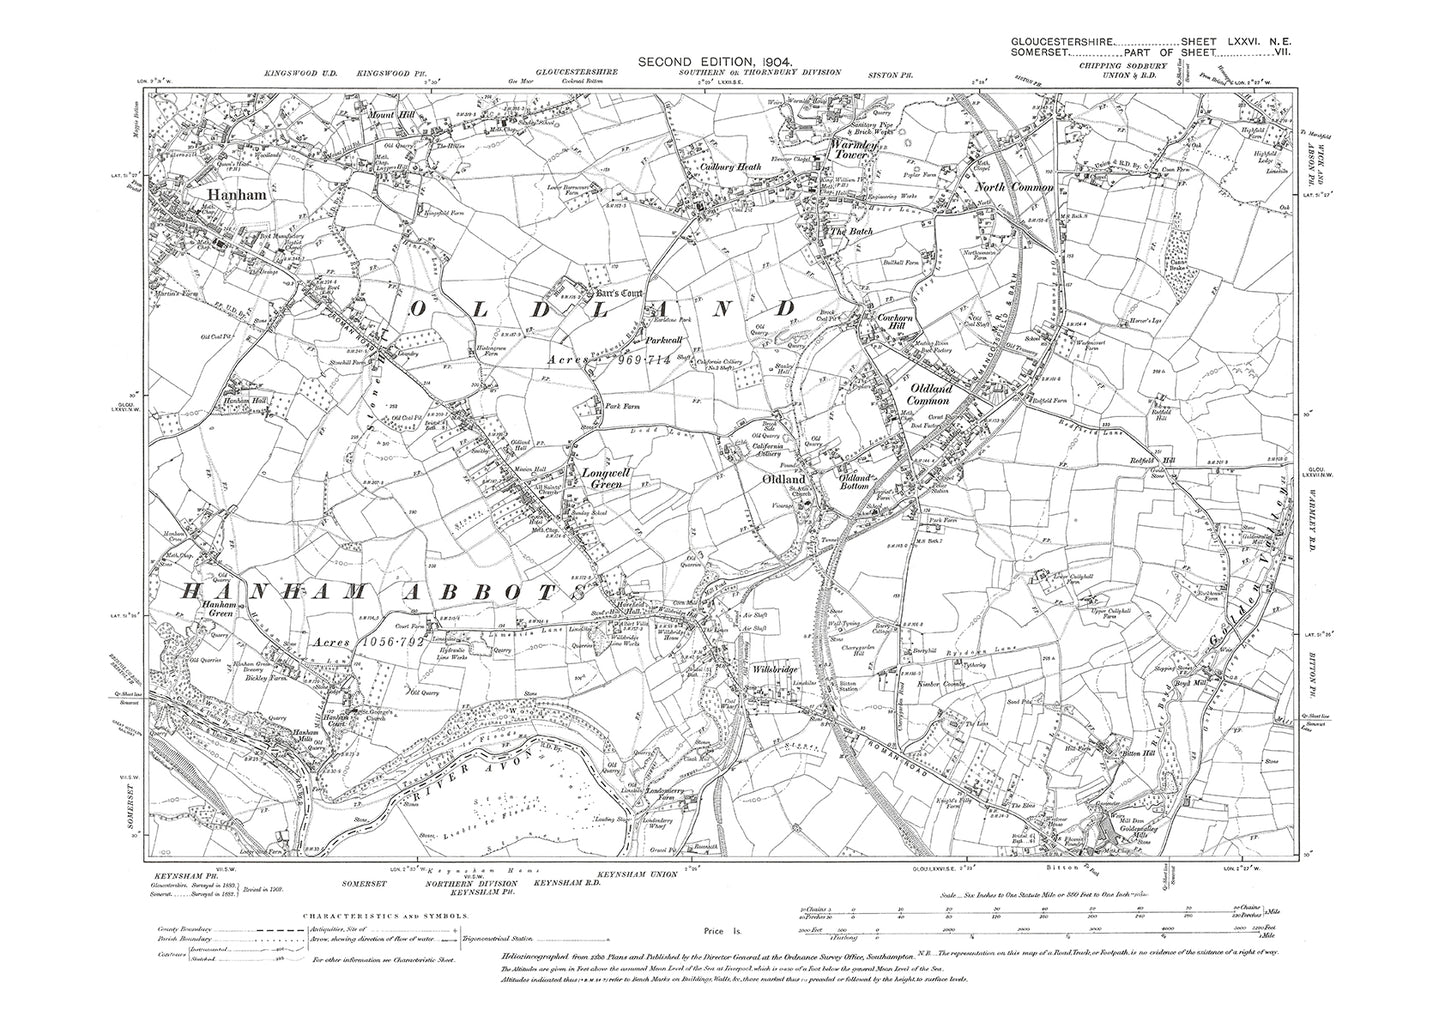 Old OS map dated 1904, showing Hanham, Oldland, Warmley Tower, Longwell Green, Bitton (north) in Gloucestershire - 76NE